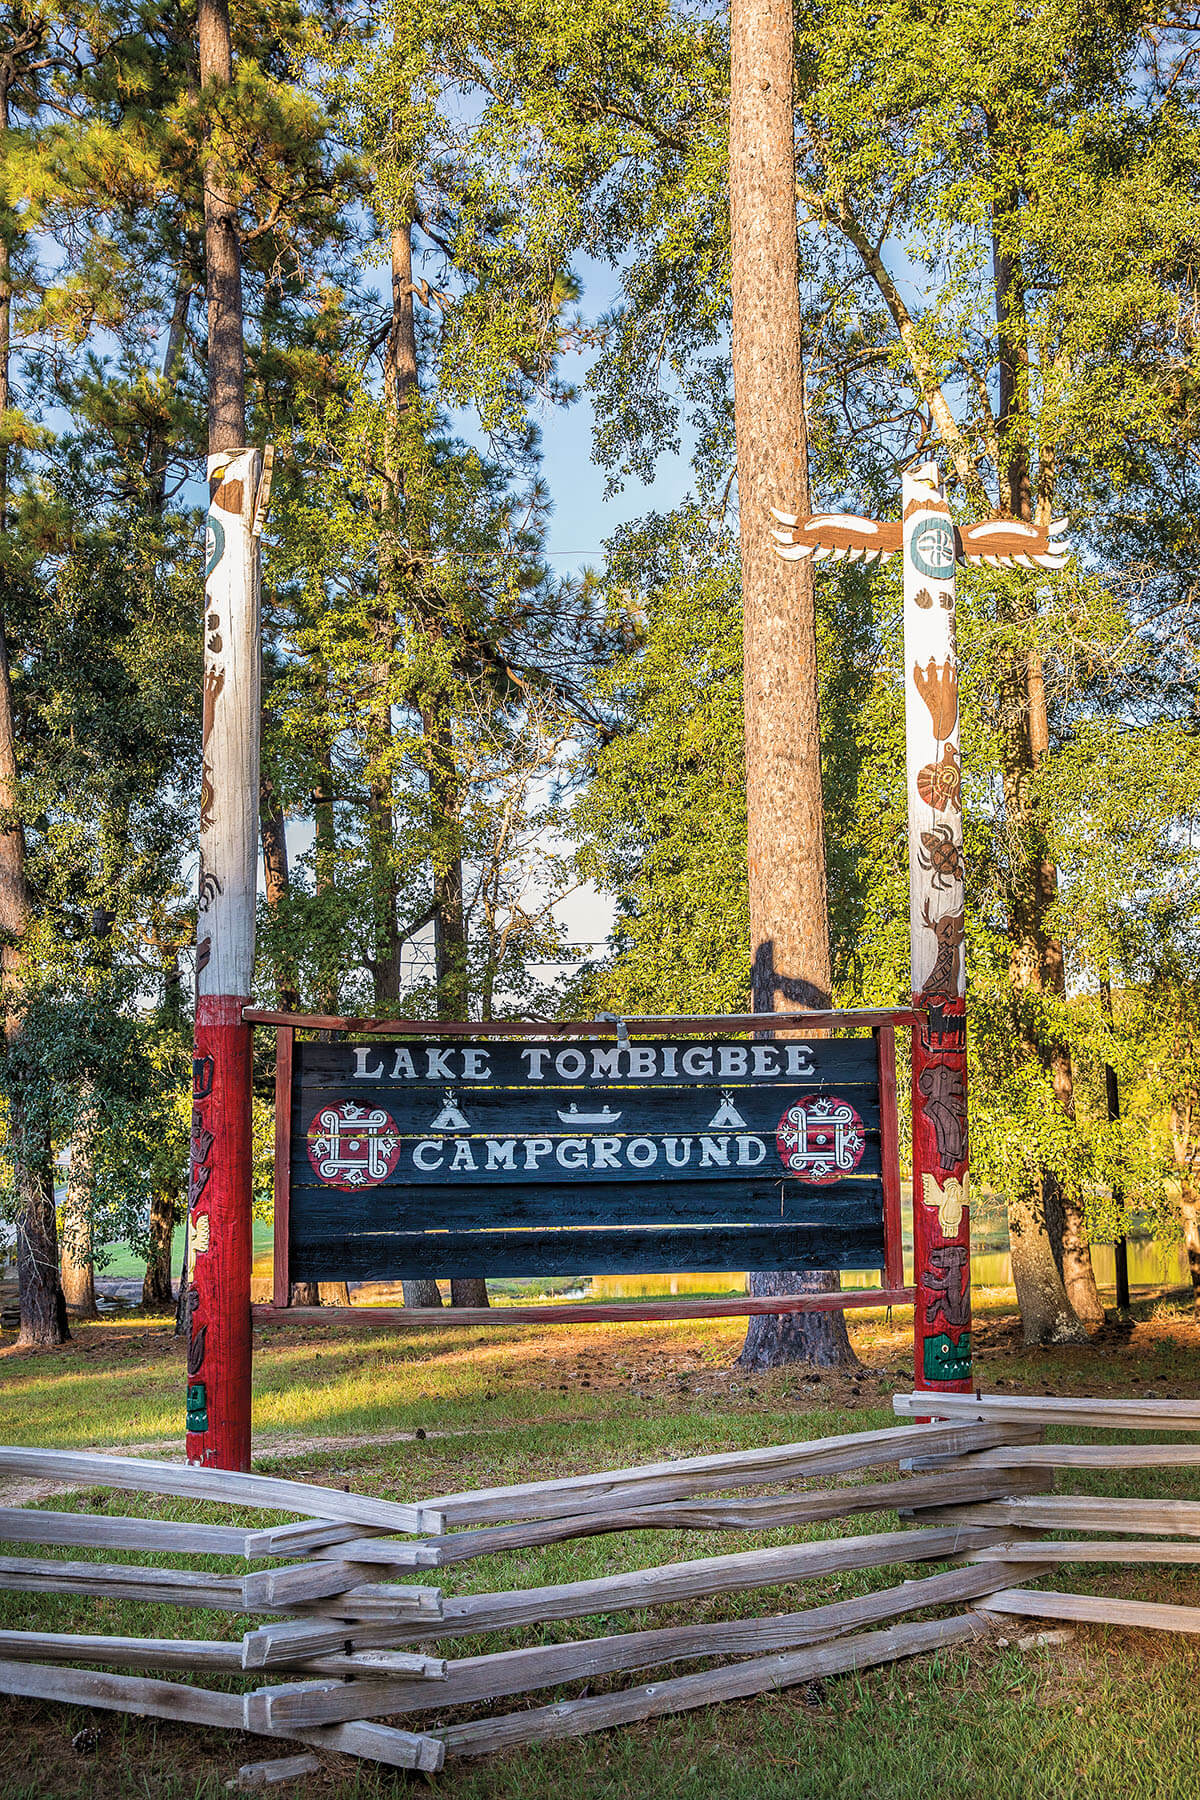 A wooden sign reading "Lake Tombigbee Campground" next to two large totem poles in a tall pine forest